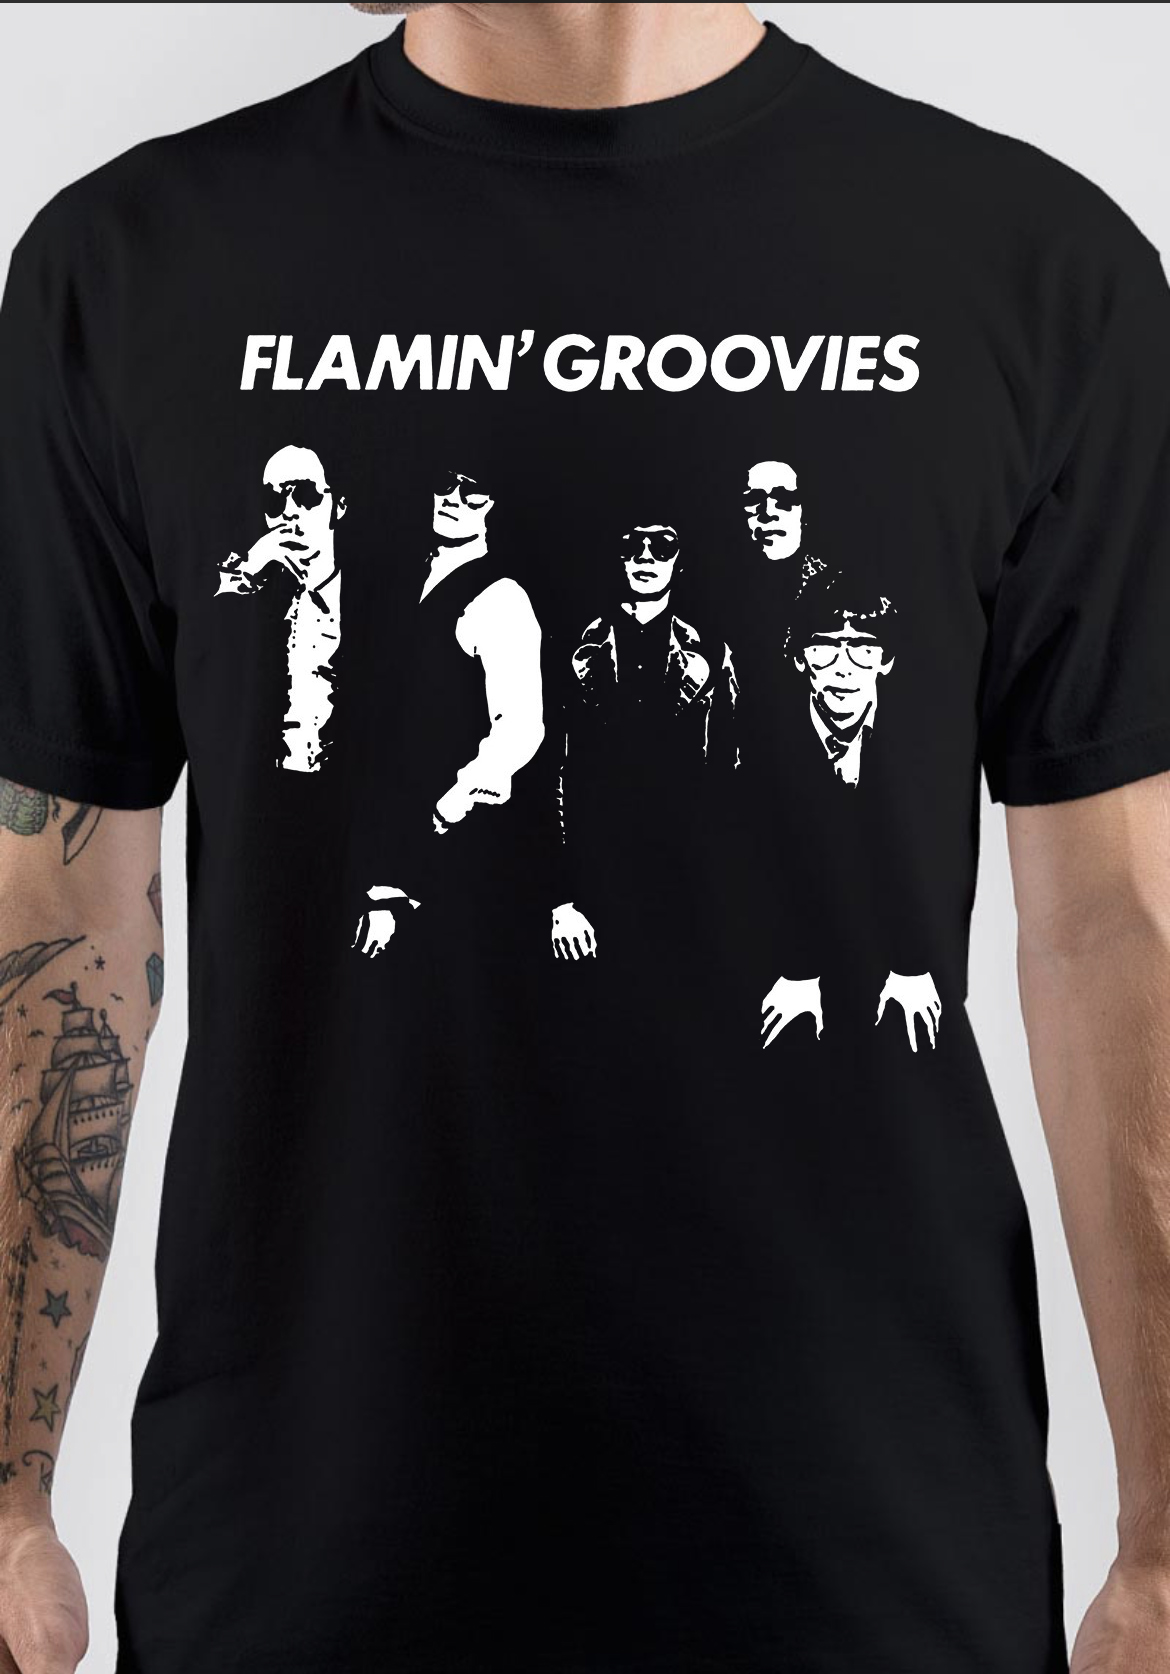 Flamin Groovies T-Shirt And Merchandise